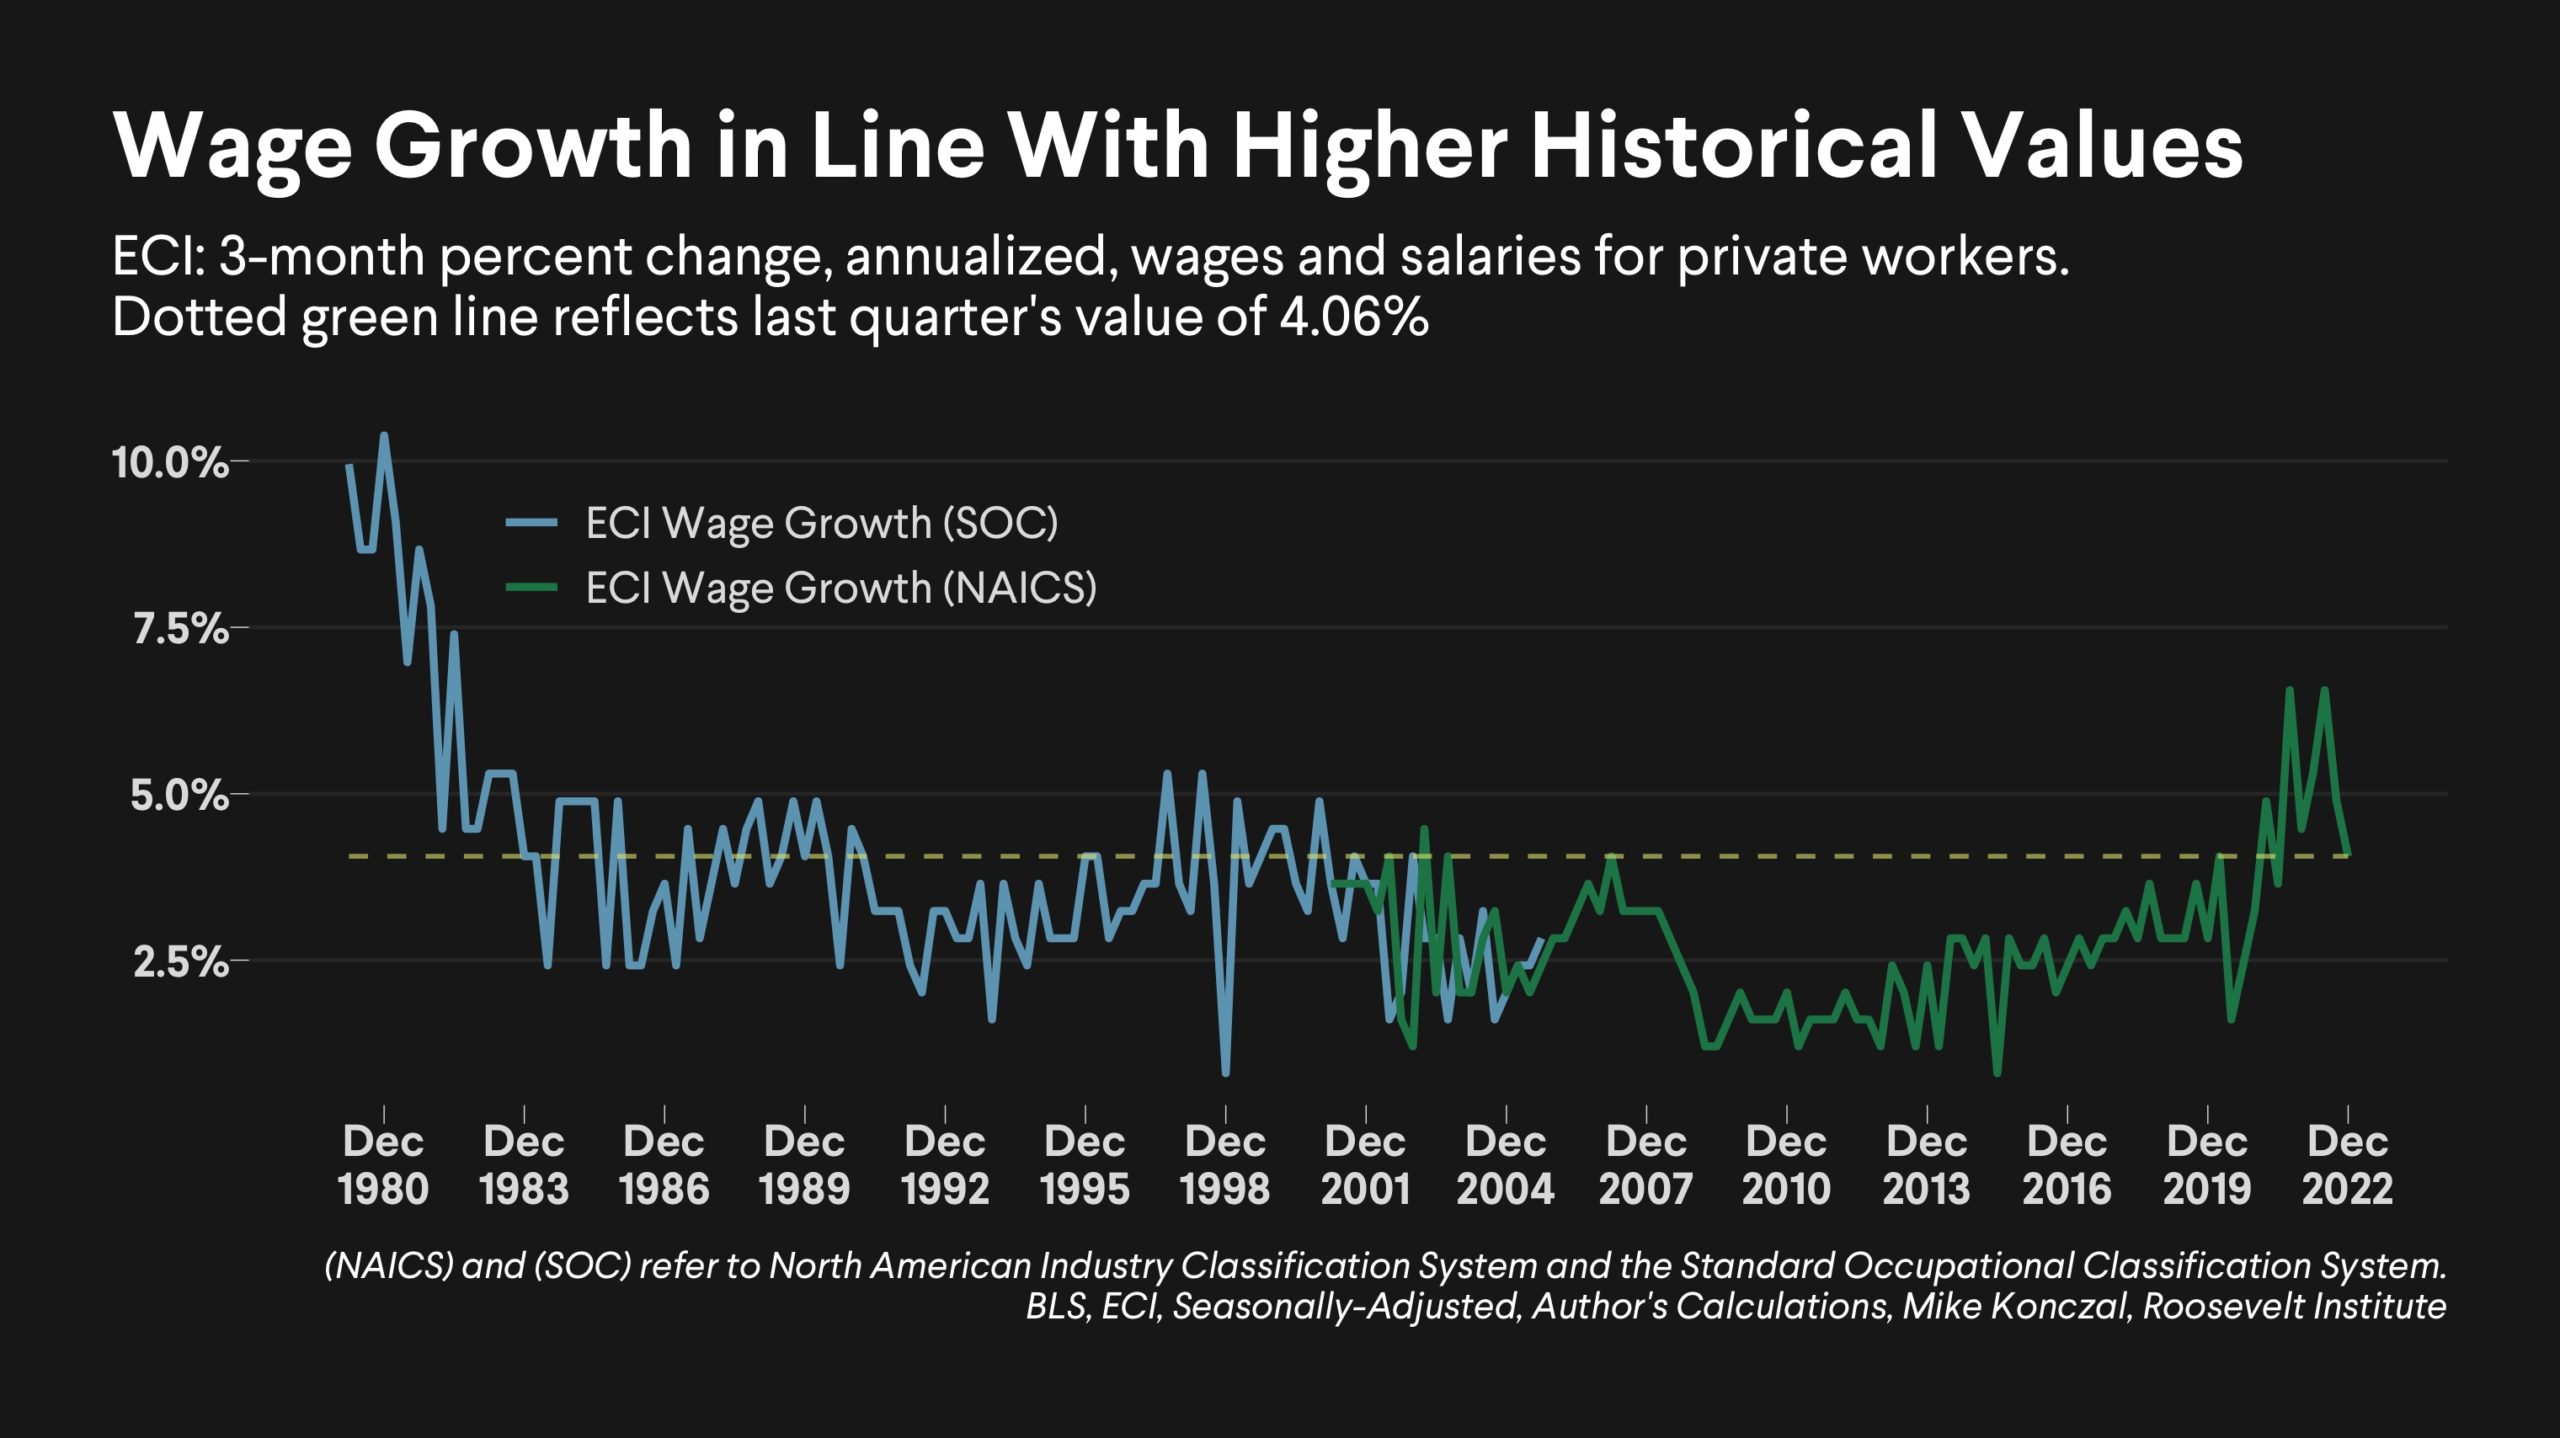 Wage growth in line with higher historical values